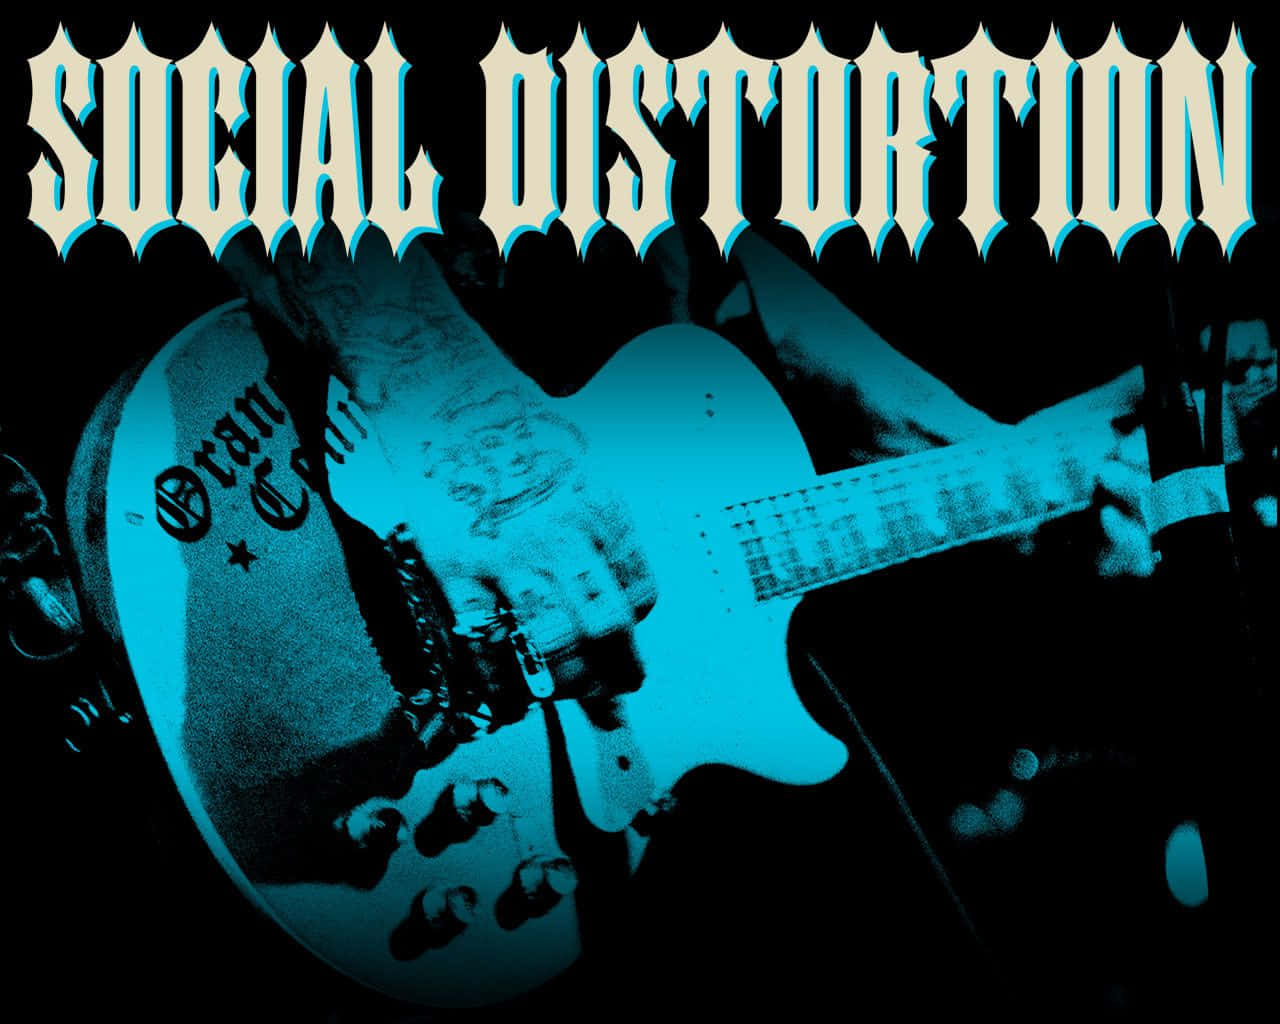 Iconic Punk Rock Band - Social Distortion In Concert